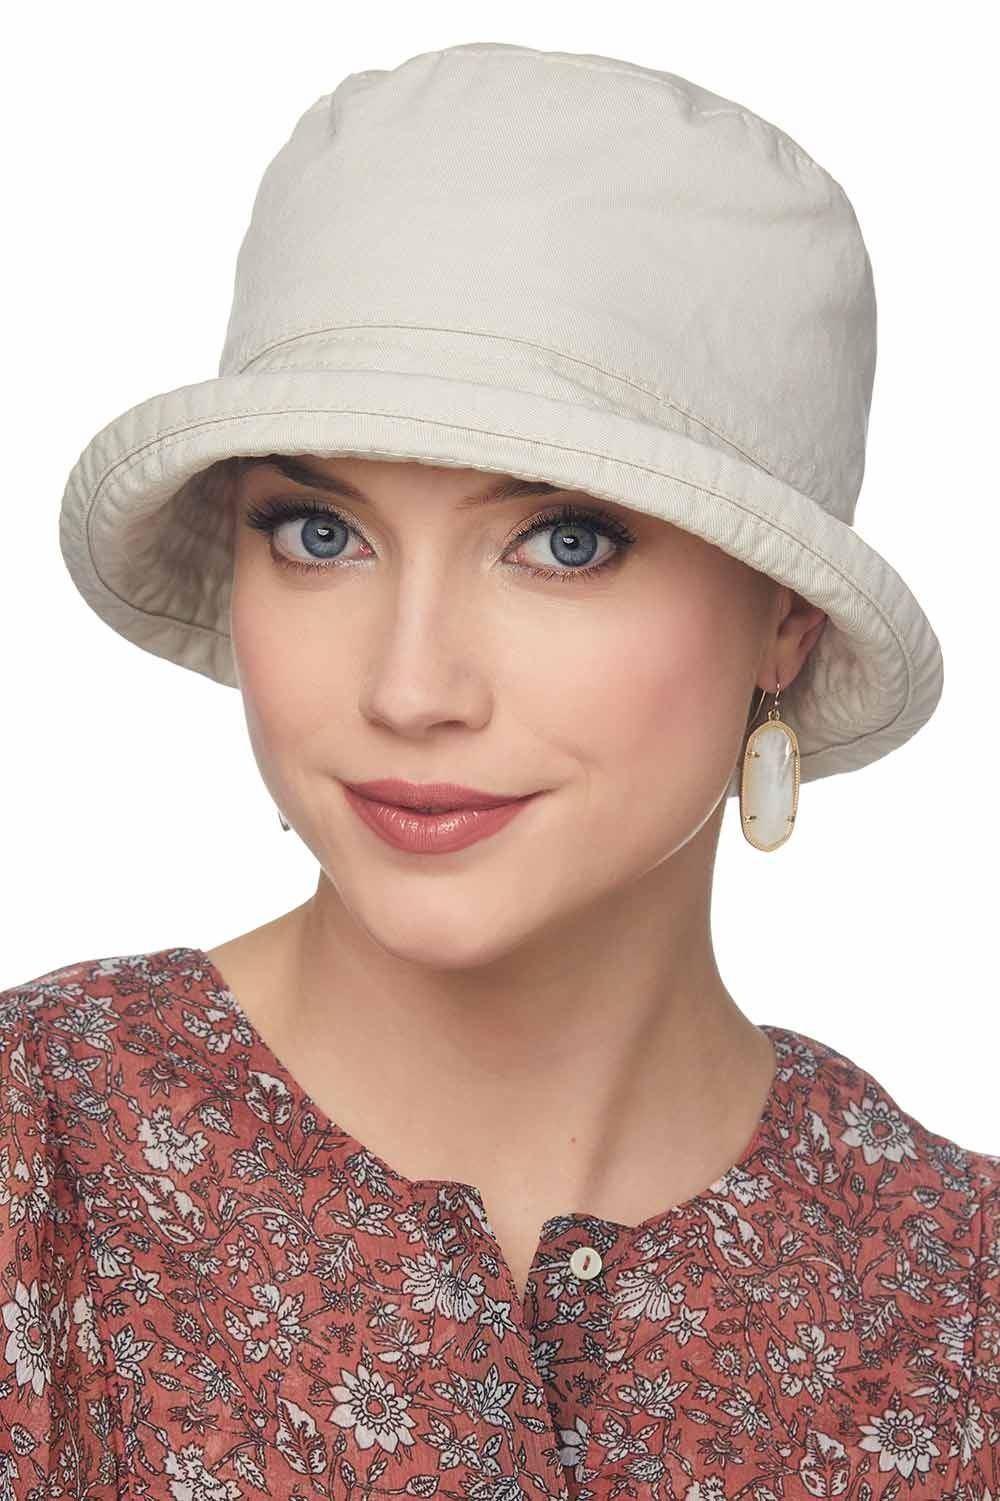 Types of hat: Picture of a lady looking good with her unique hat